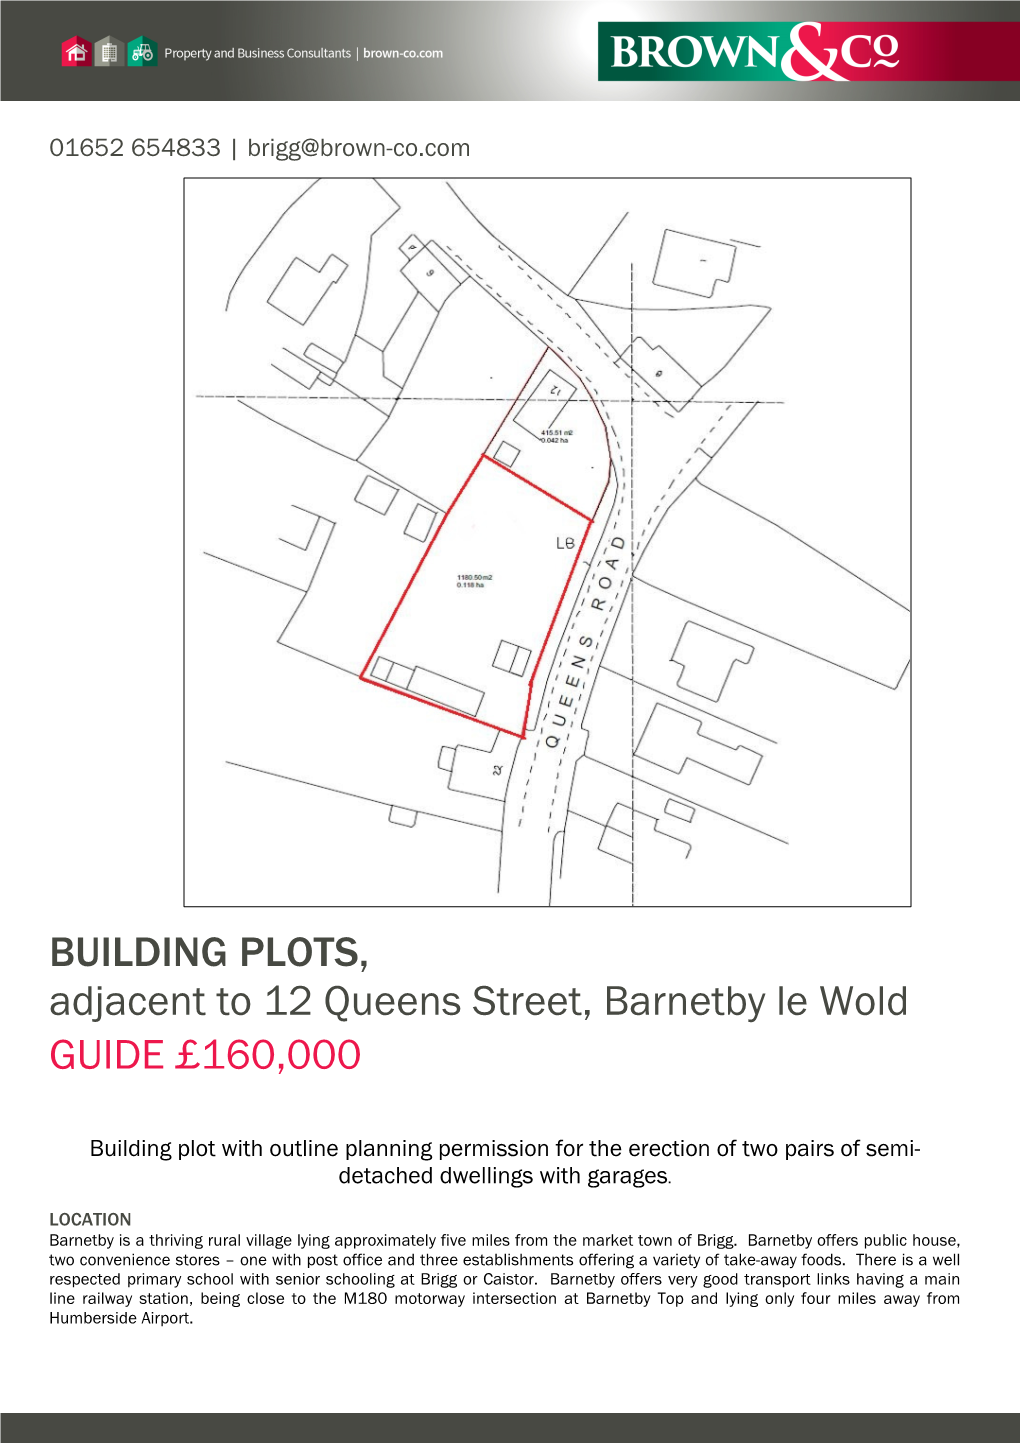 BUILDING PLOTS, Adjacent to 12 Queens Street, Barnetby Le Wold